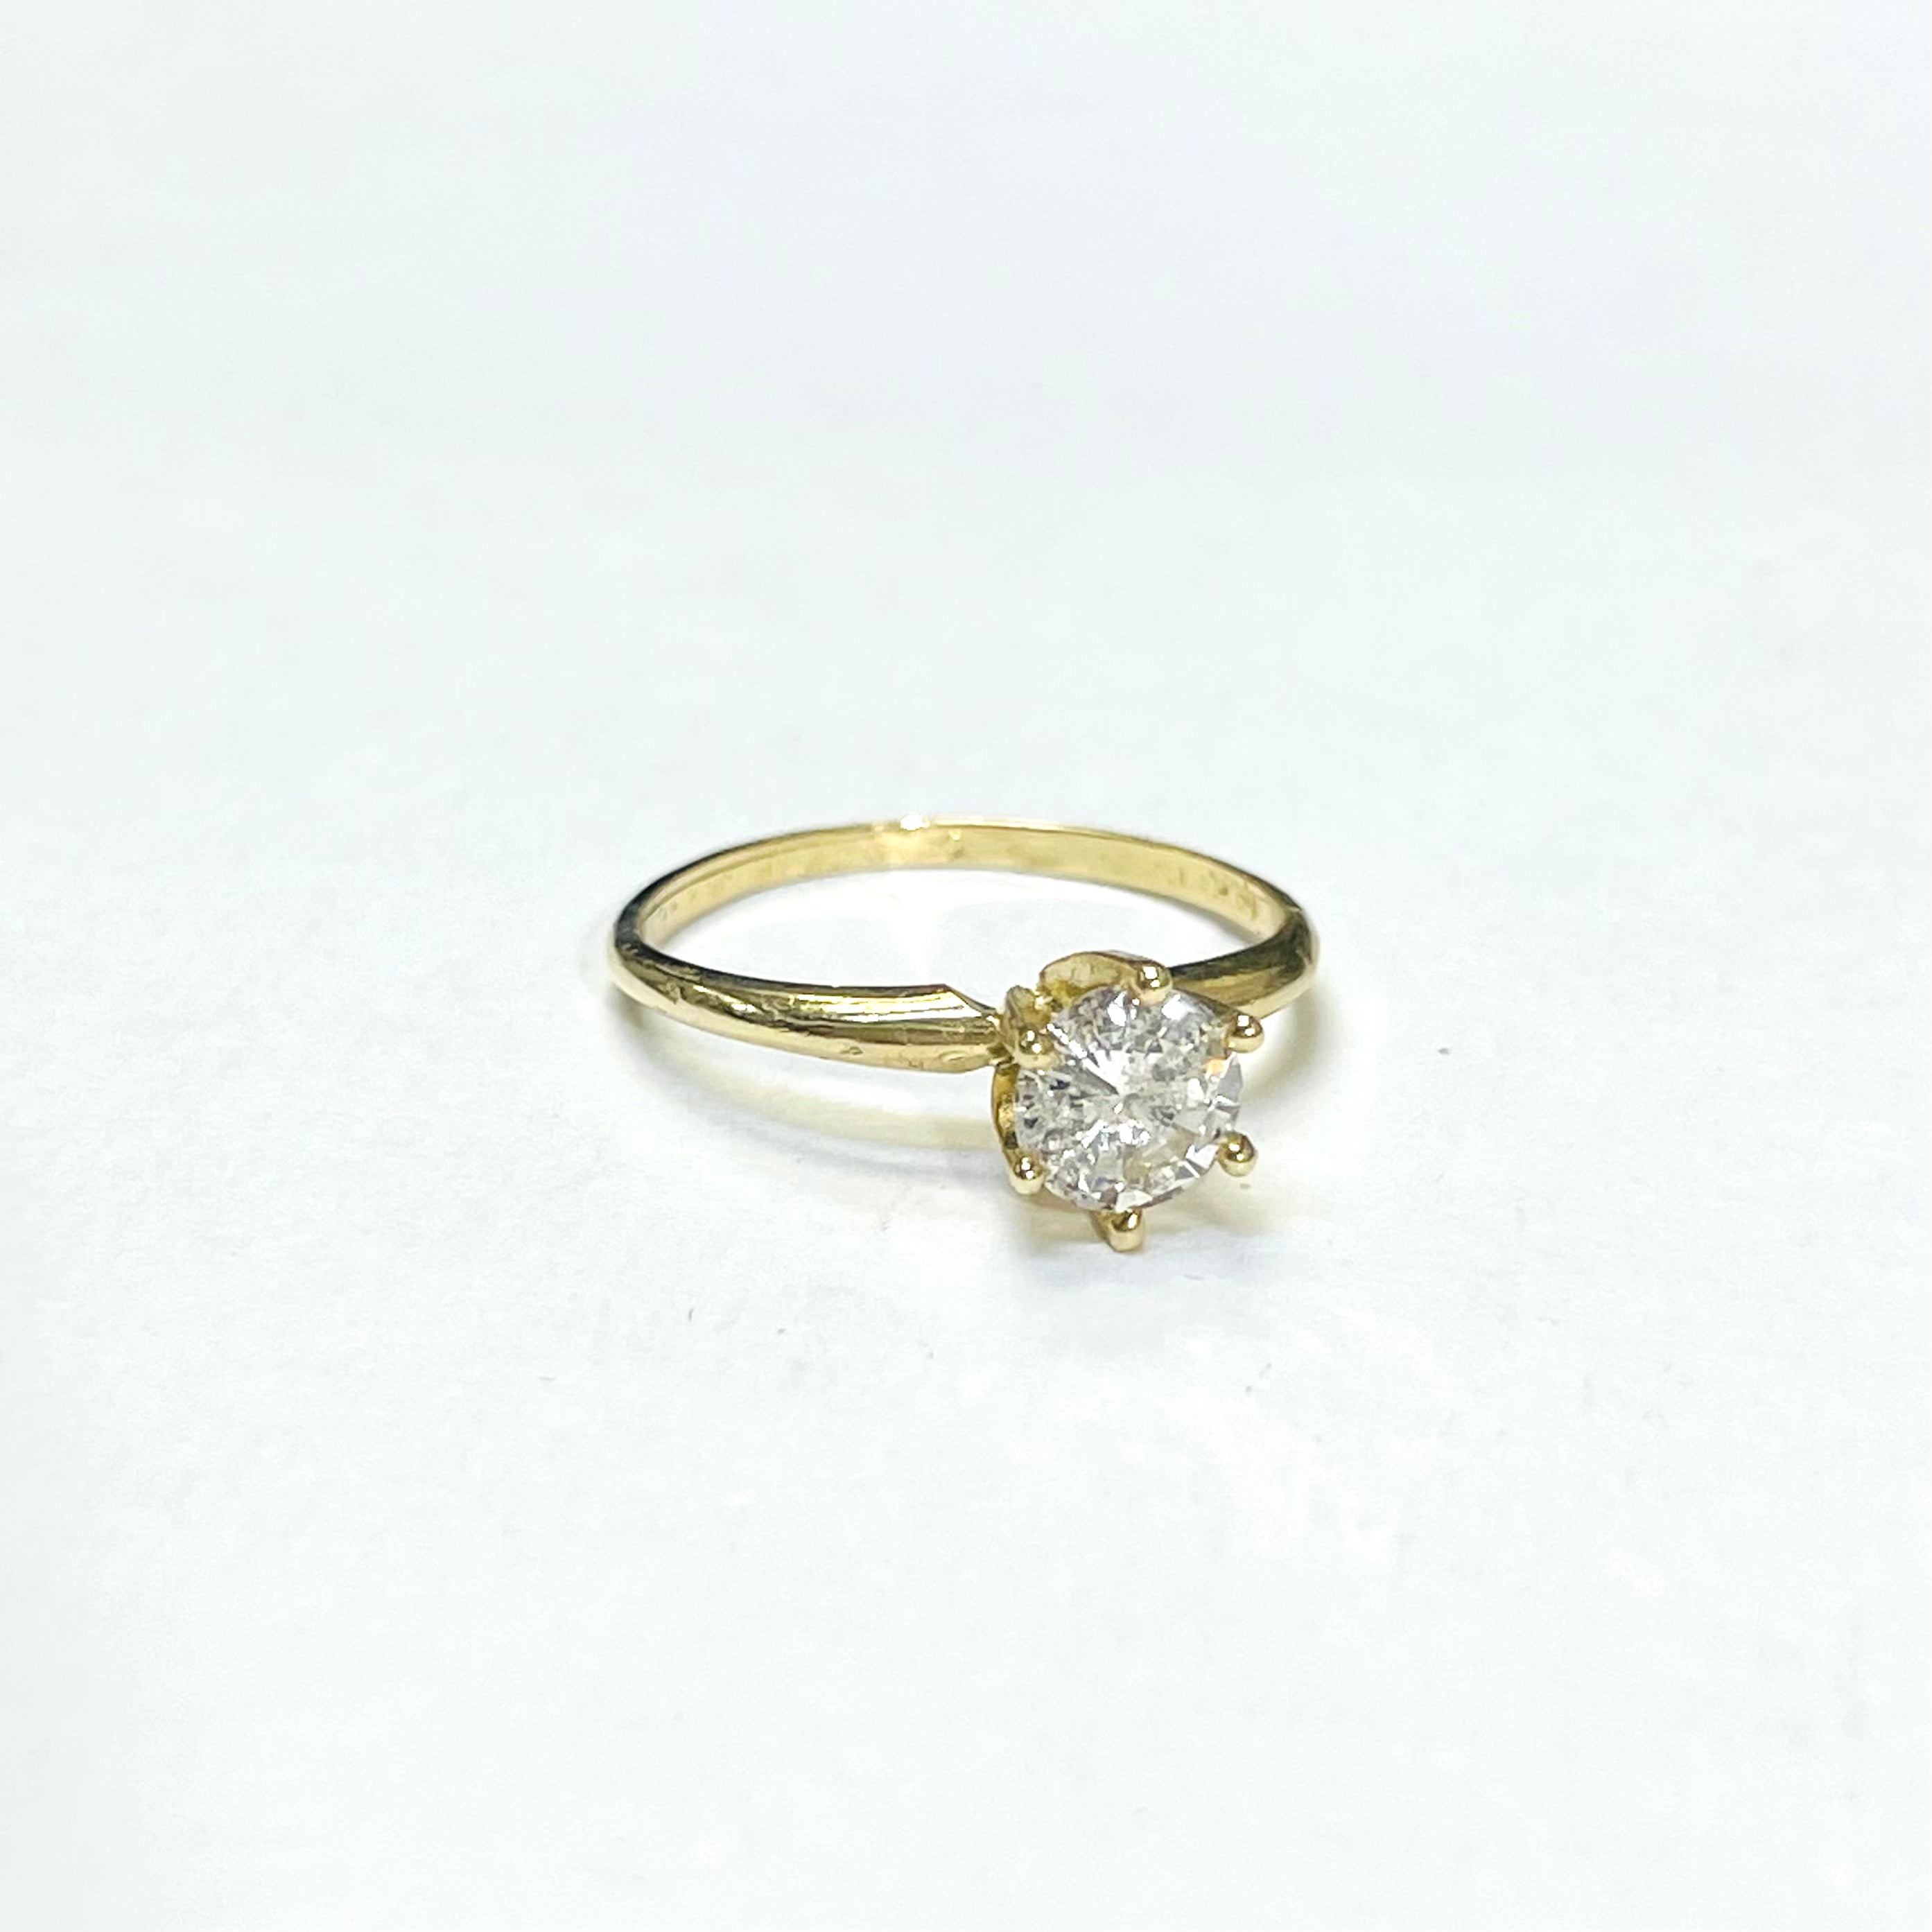 .83CT SI1 H Diamond Solitaire Ring in 14k Yellow Gold Size 7.75